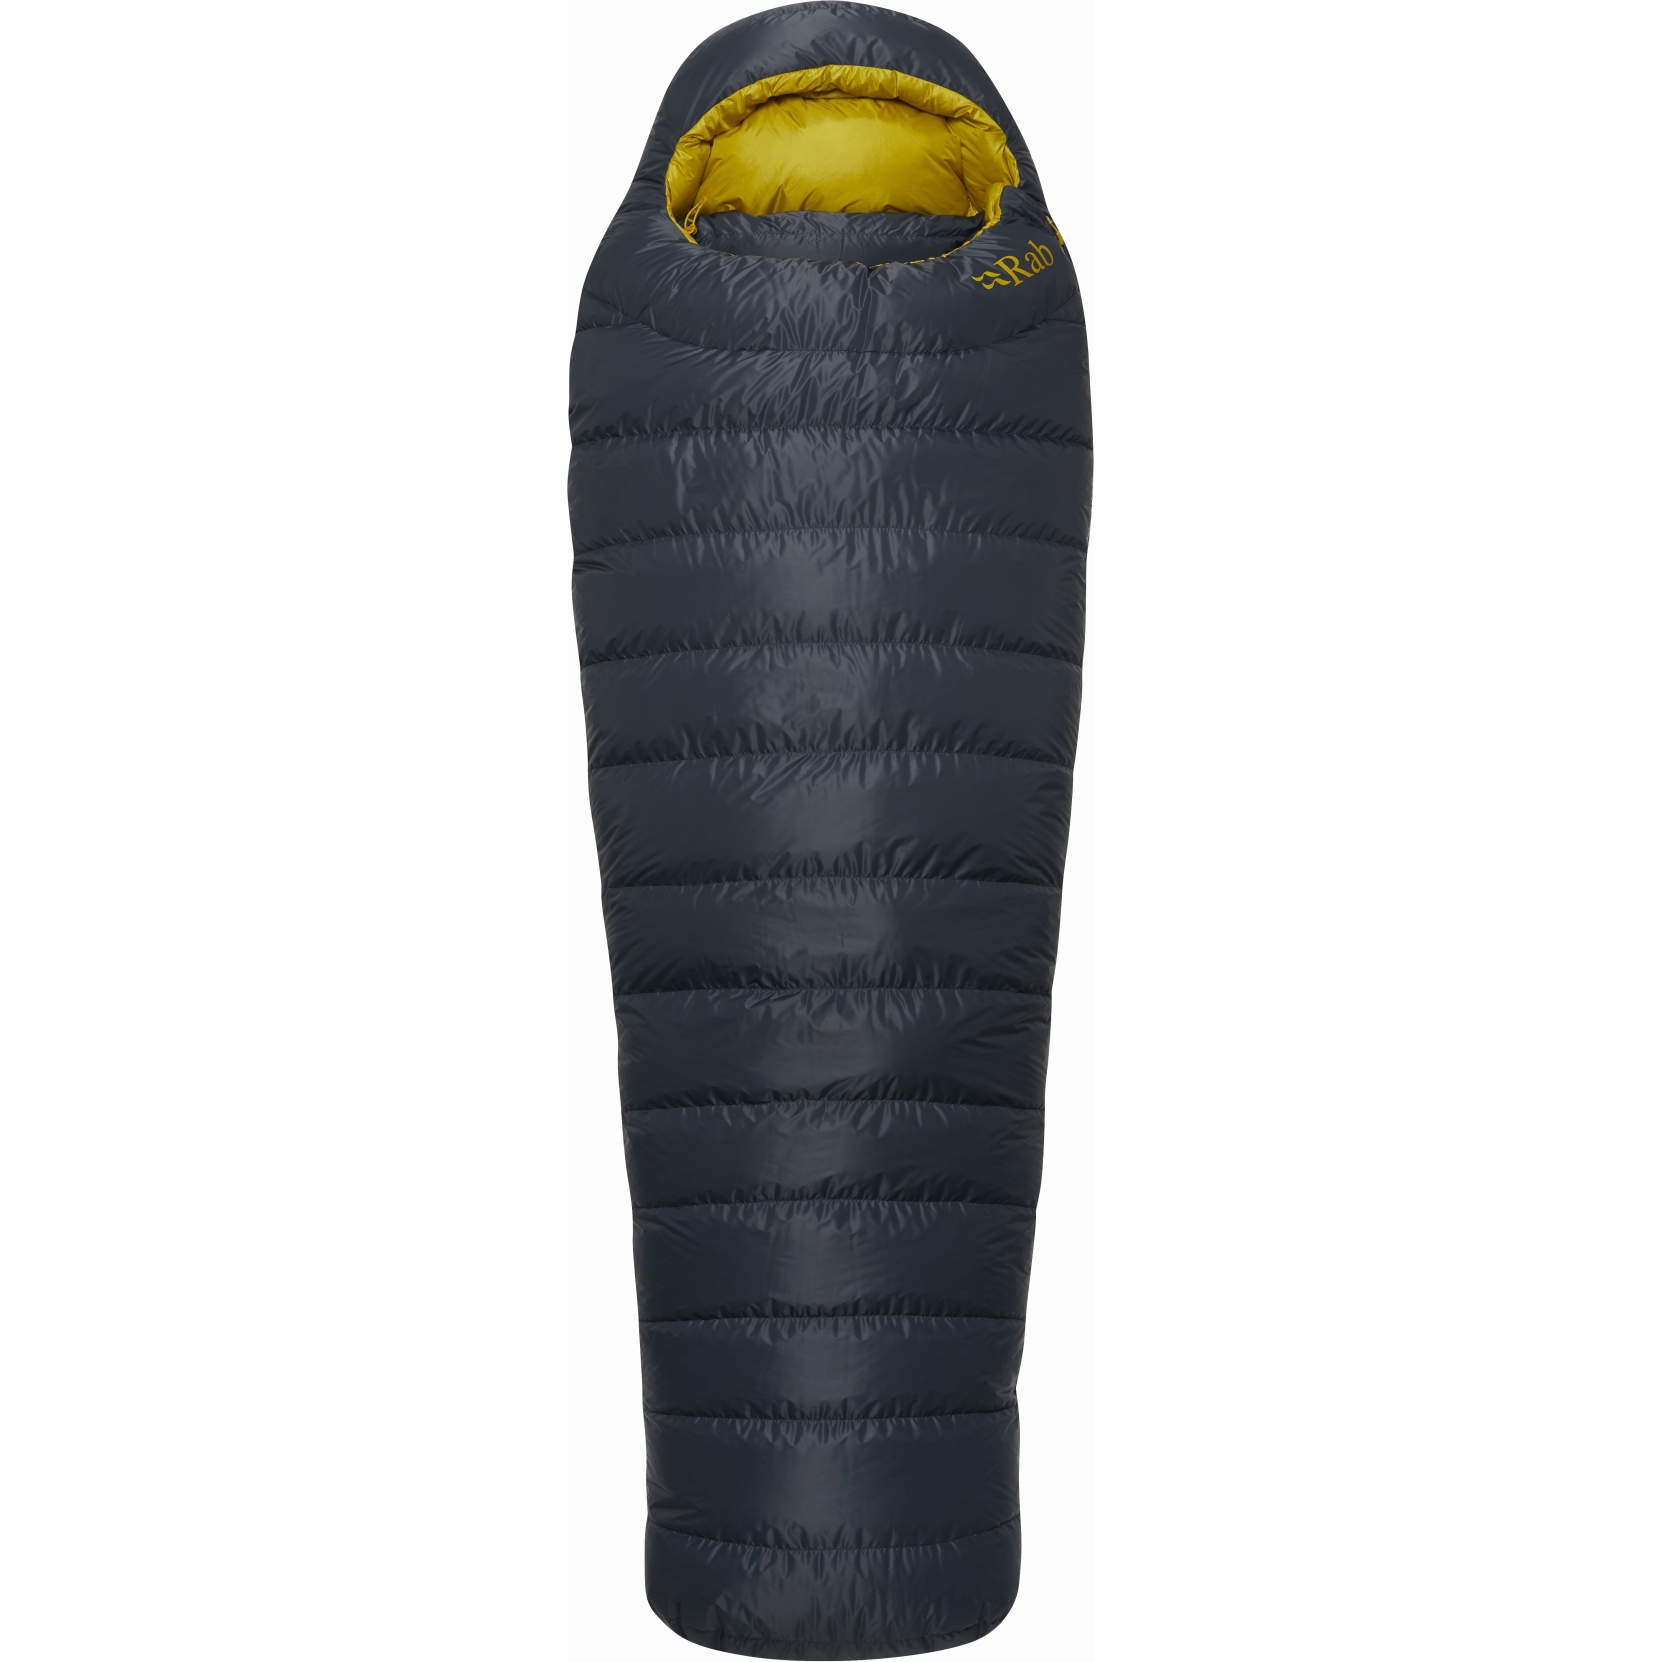 Picture of Rab Ascent Pro 800 Down Sleeping Bag - Zipper left - beluga